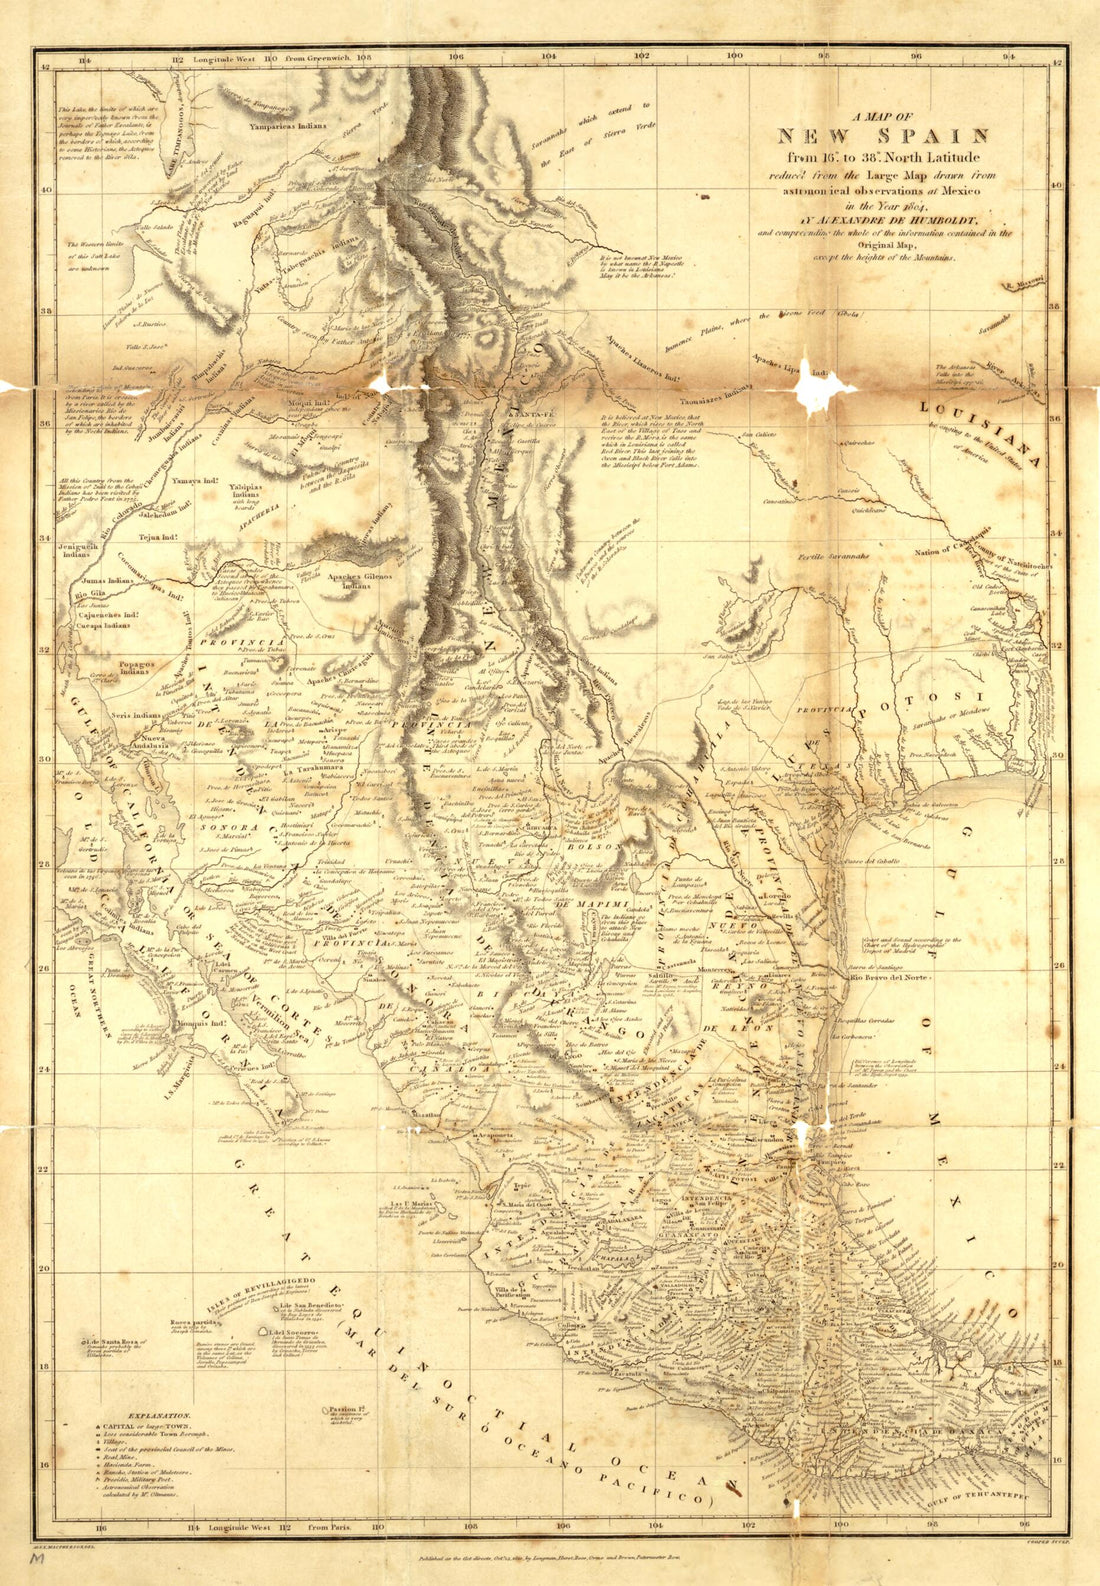 This old map of A Map of New Spain, from 16⁰ to 38⁰ North Latitude Reduced from the Large Map from 1804 was created by Alexander Von Humboldt in 1804